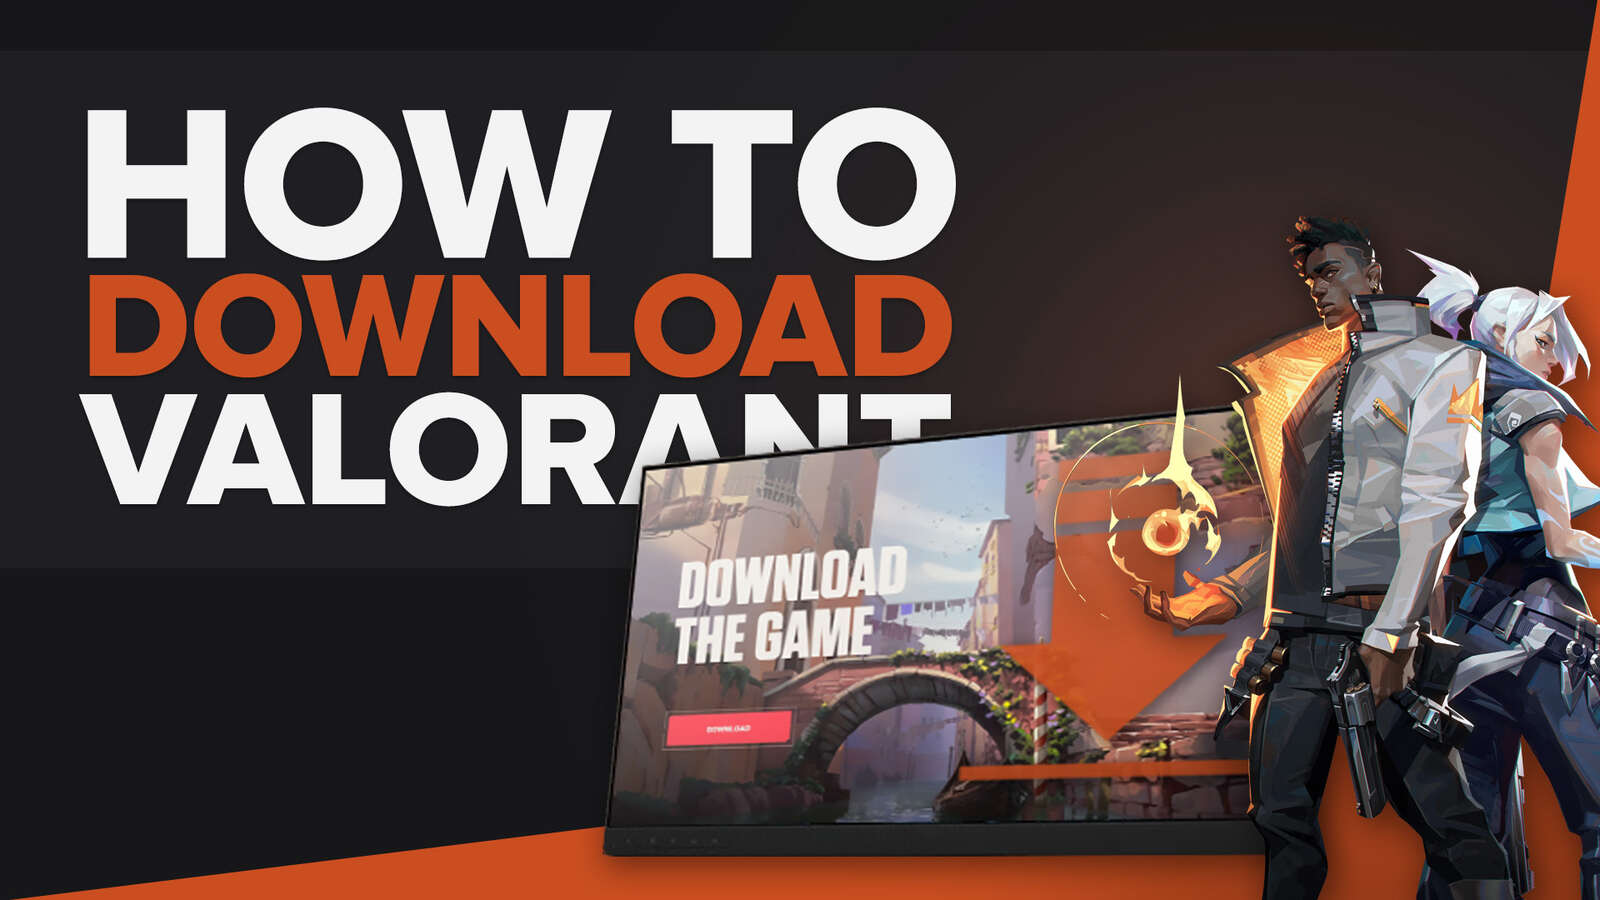 How to Download Valorant